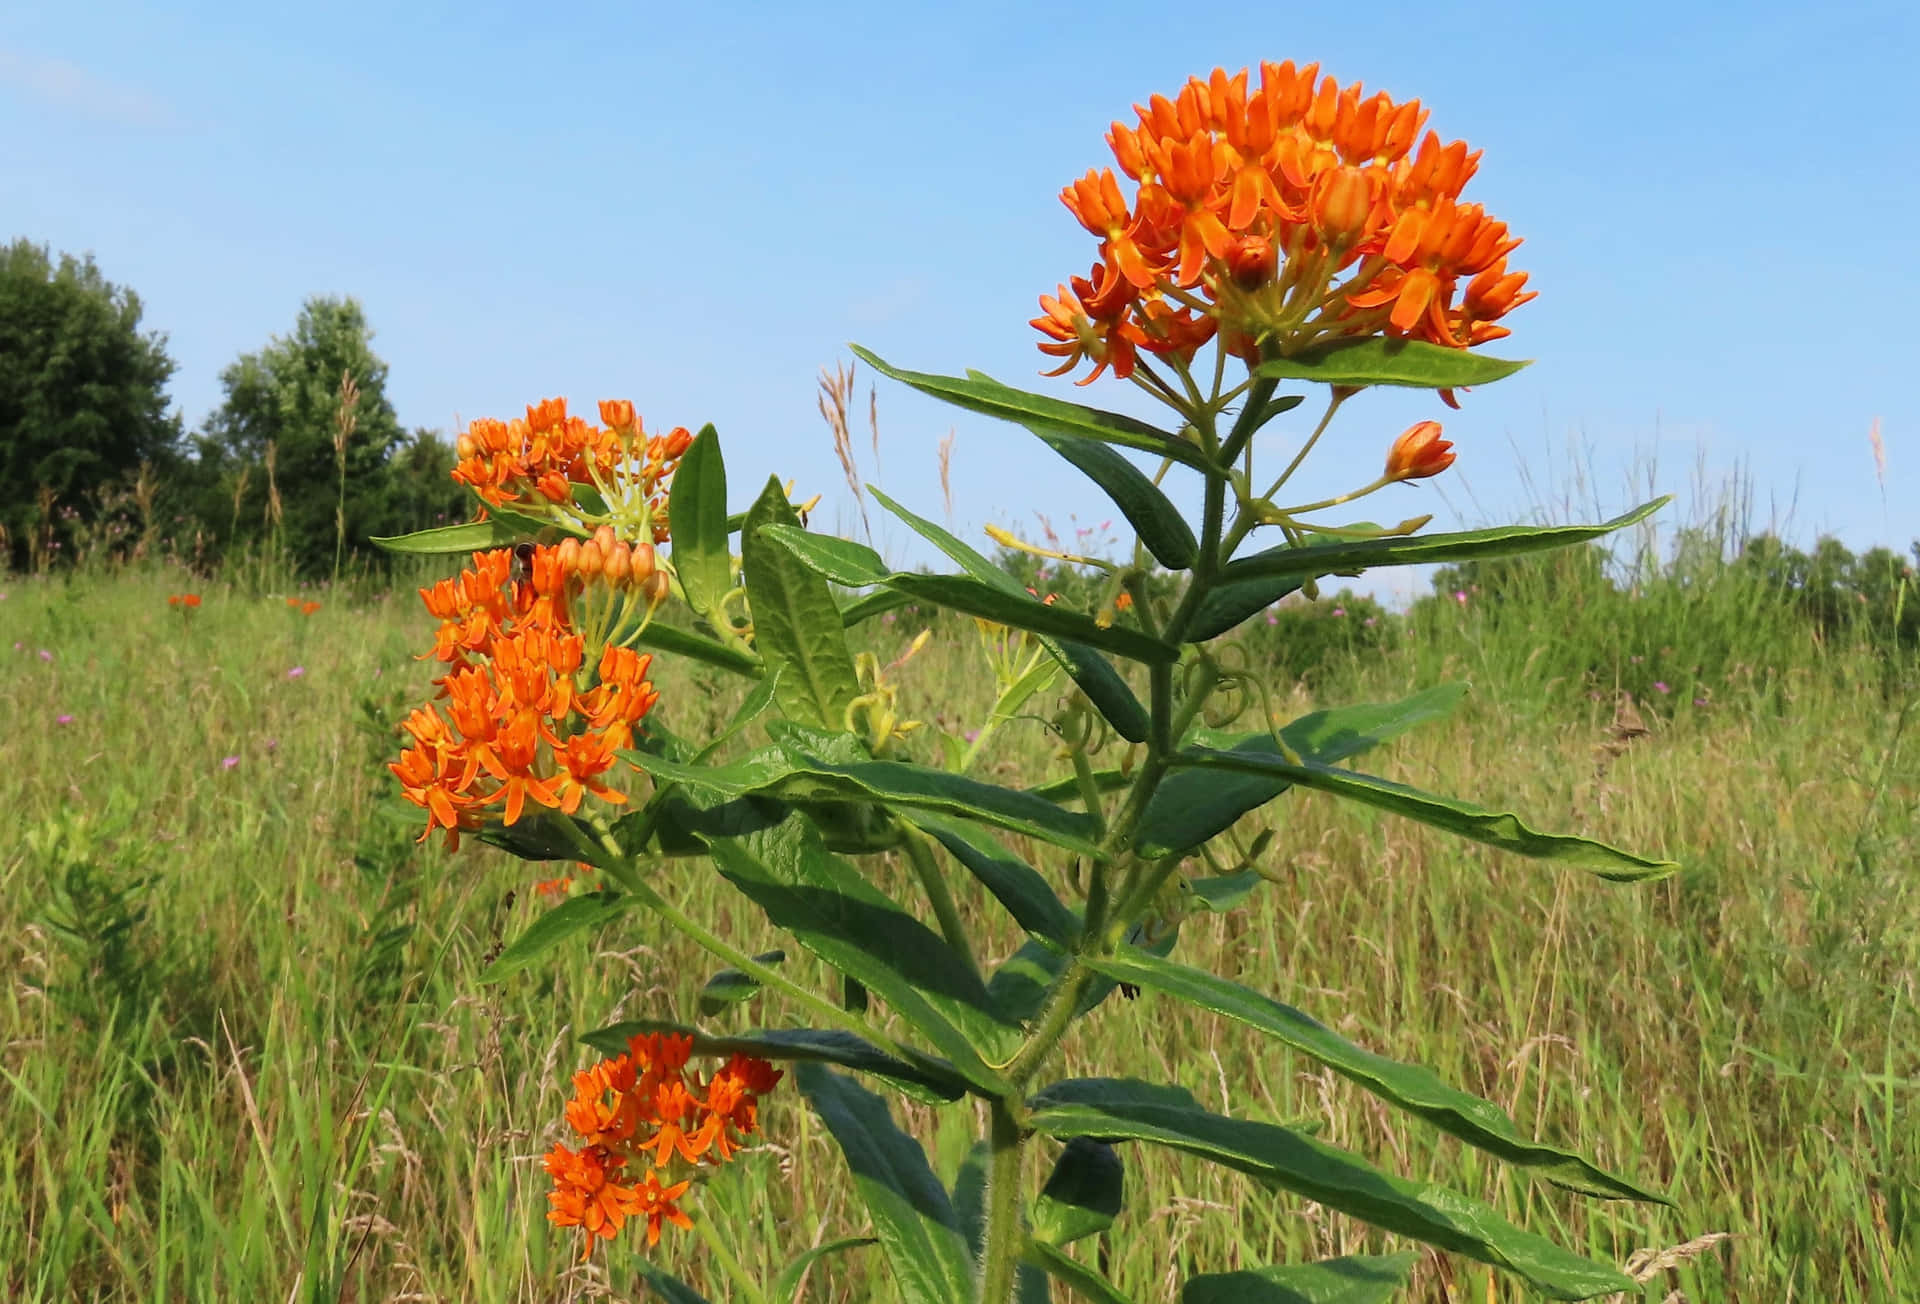 The captivating orange flowers of the Butterfly Weed plant Wallpaper